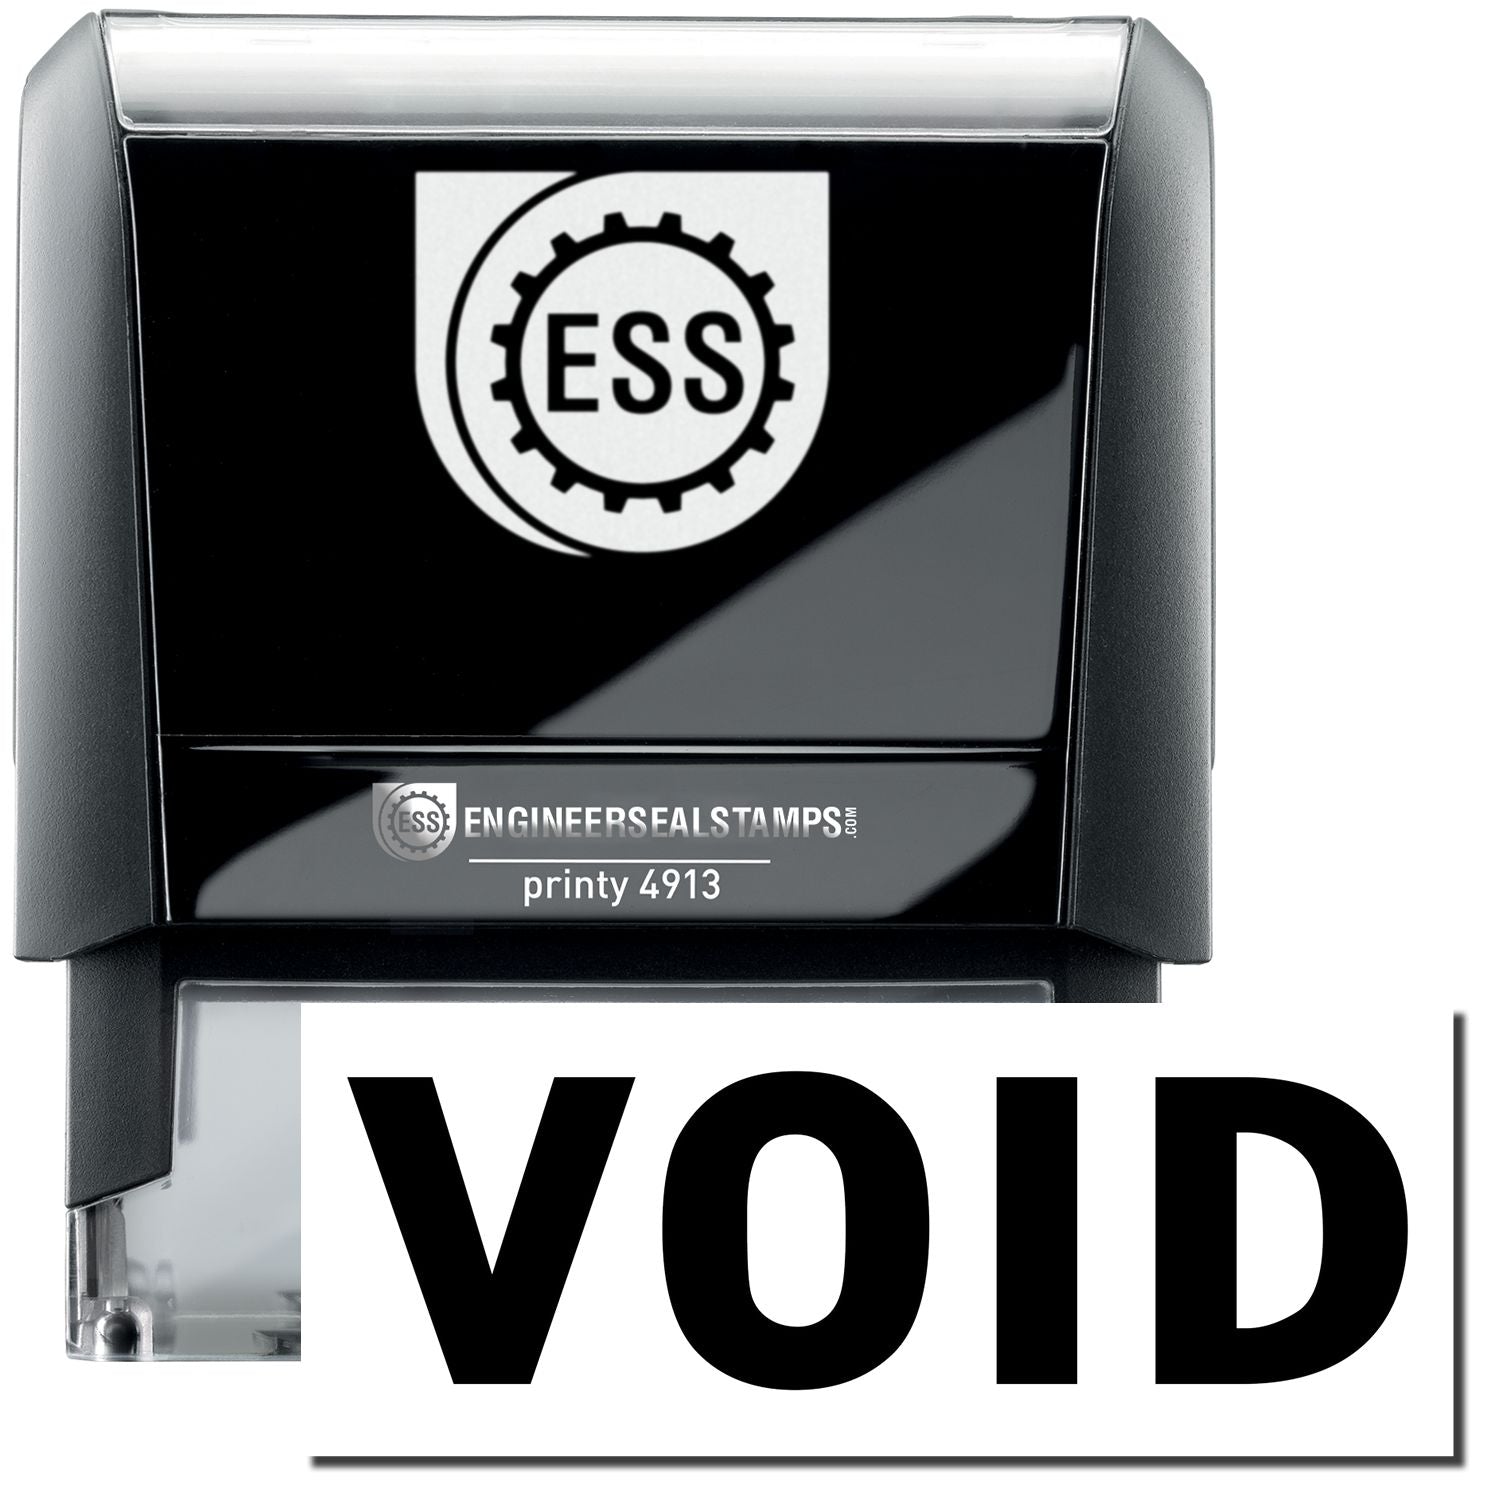 A self-inking stamp with a stamped image showing how the text "VOID" in a large bold font is displayed by it.